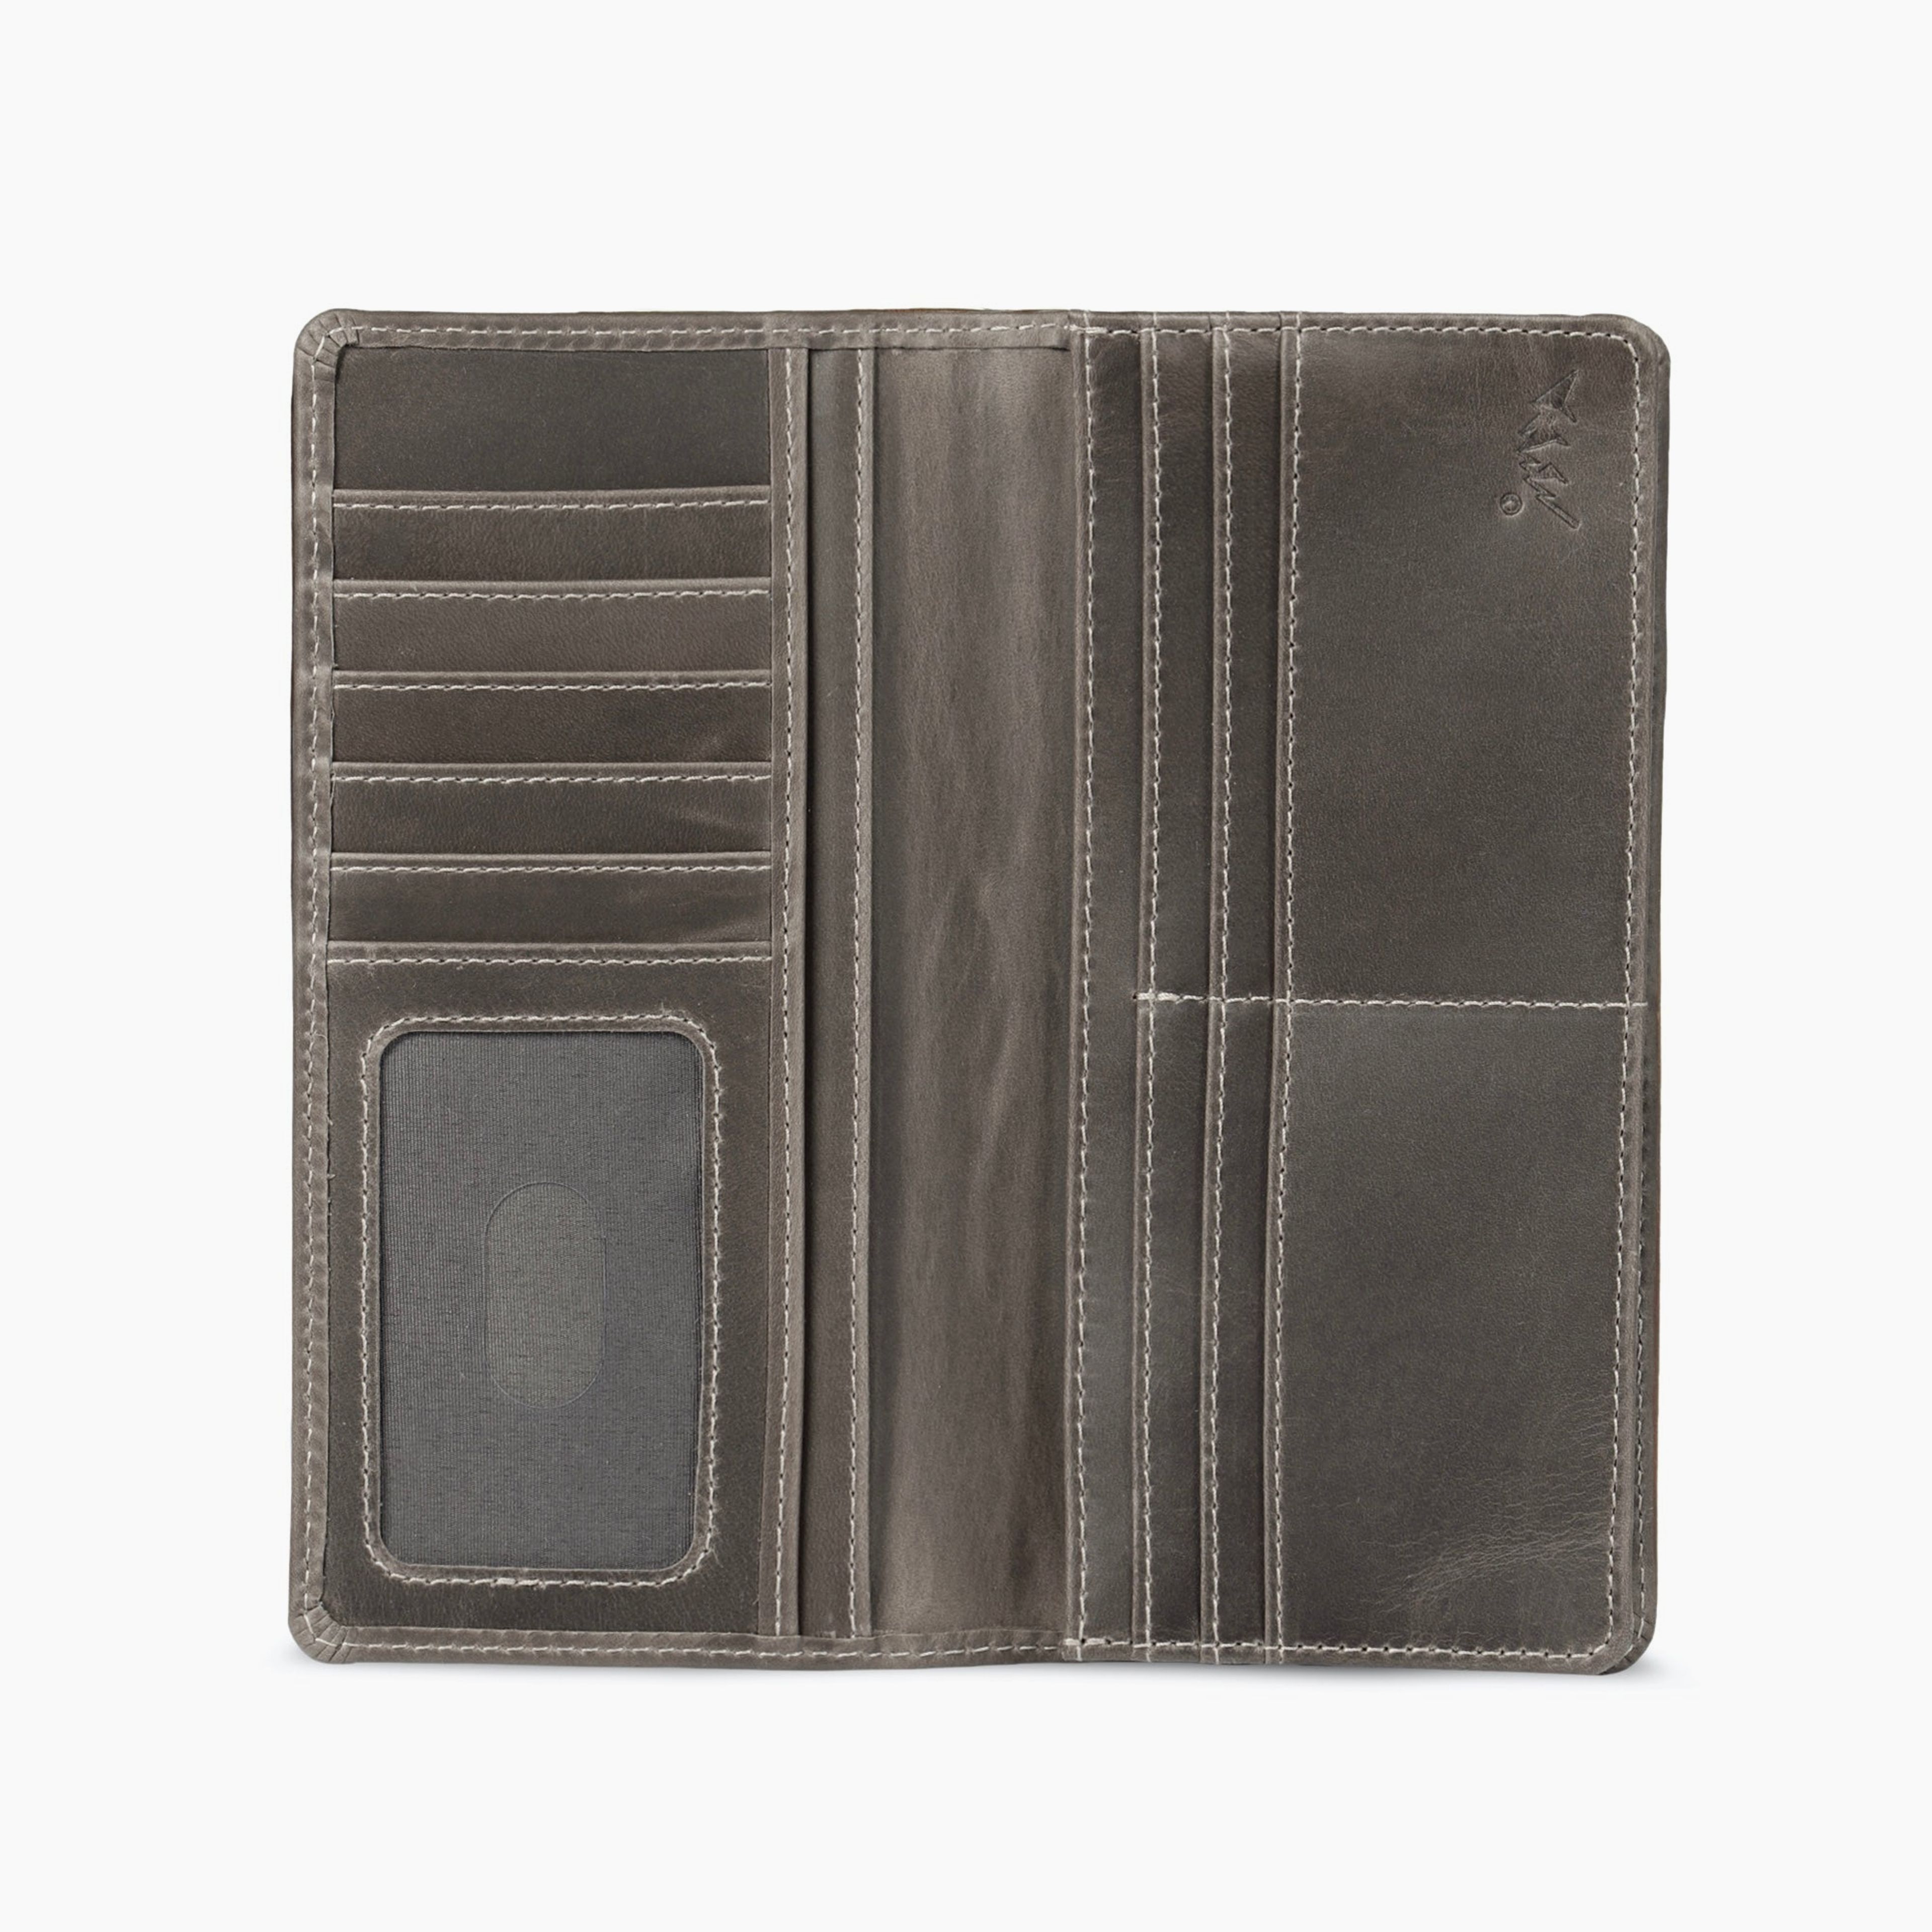 Almost Perfect | Peel Leather Wallet - Gray